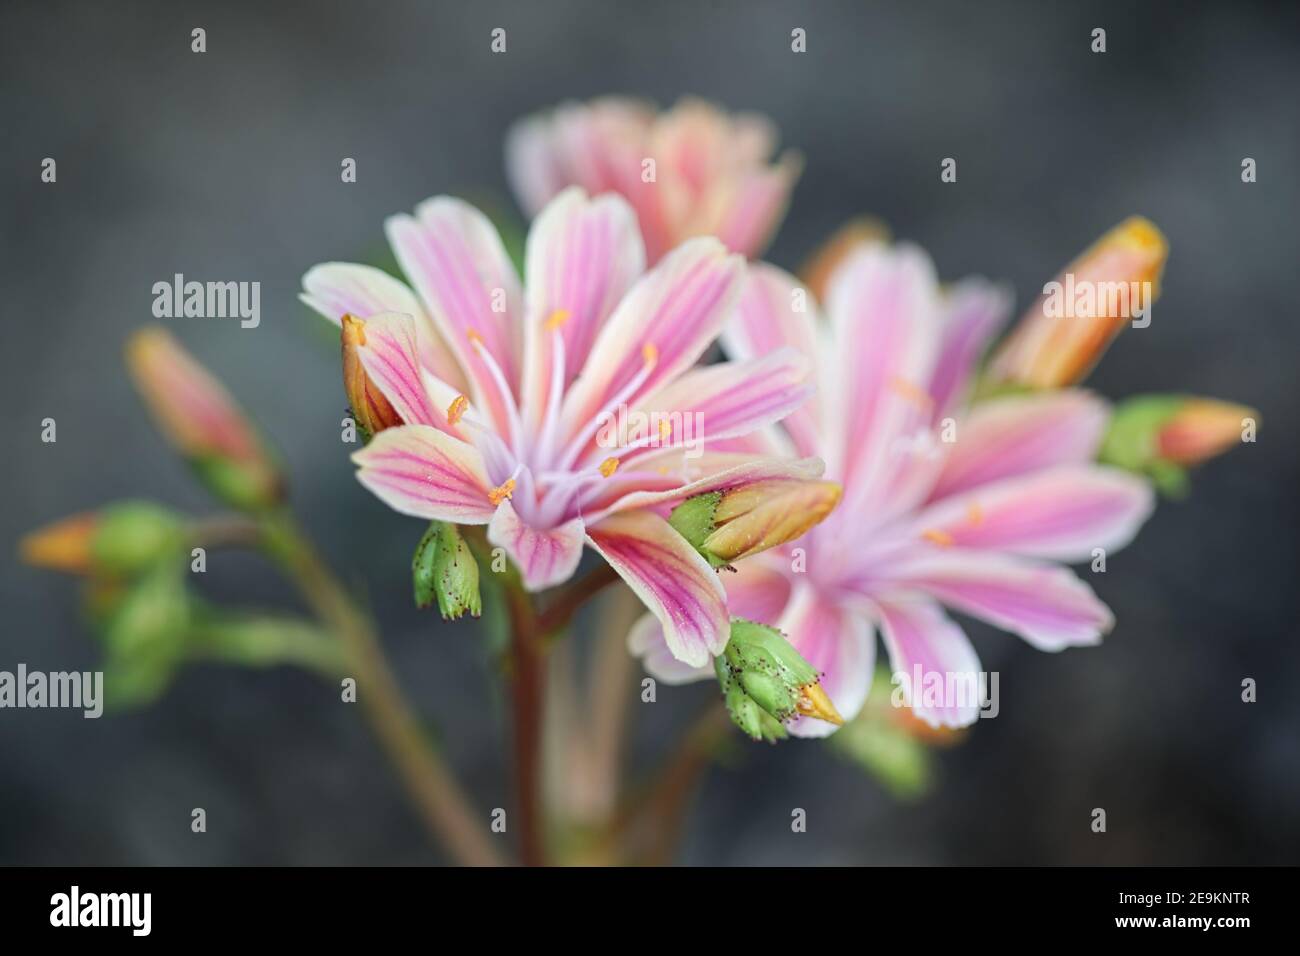 Lewisia cotyledon,  known commonly as Siskiyou lewisia and cliff maids, an evergreen perennial garden plant Stock Photo